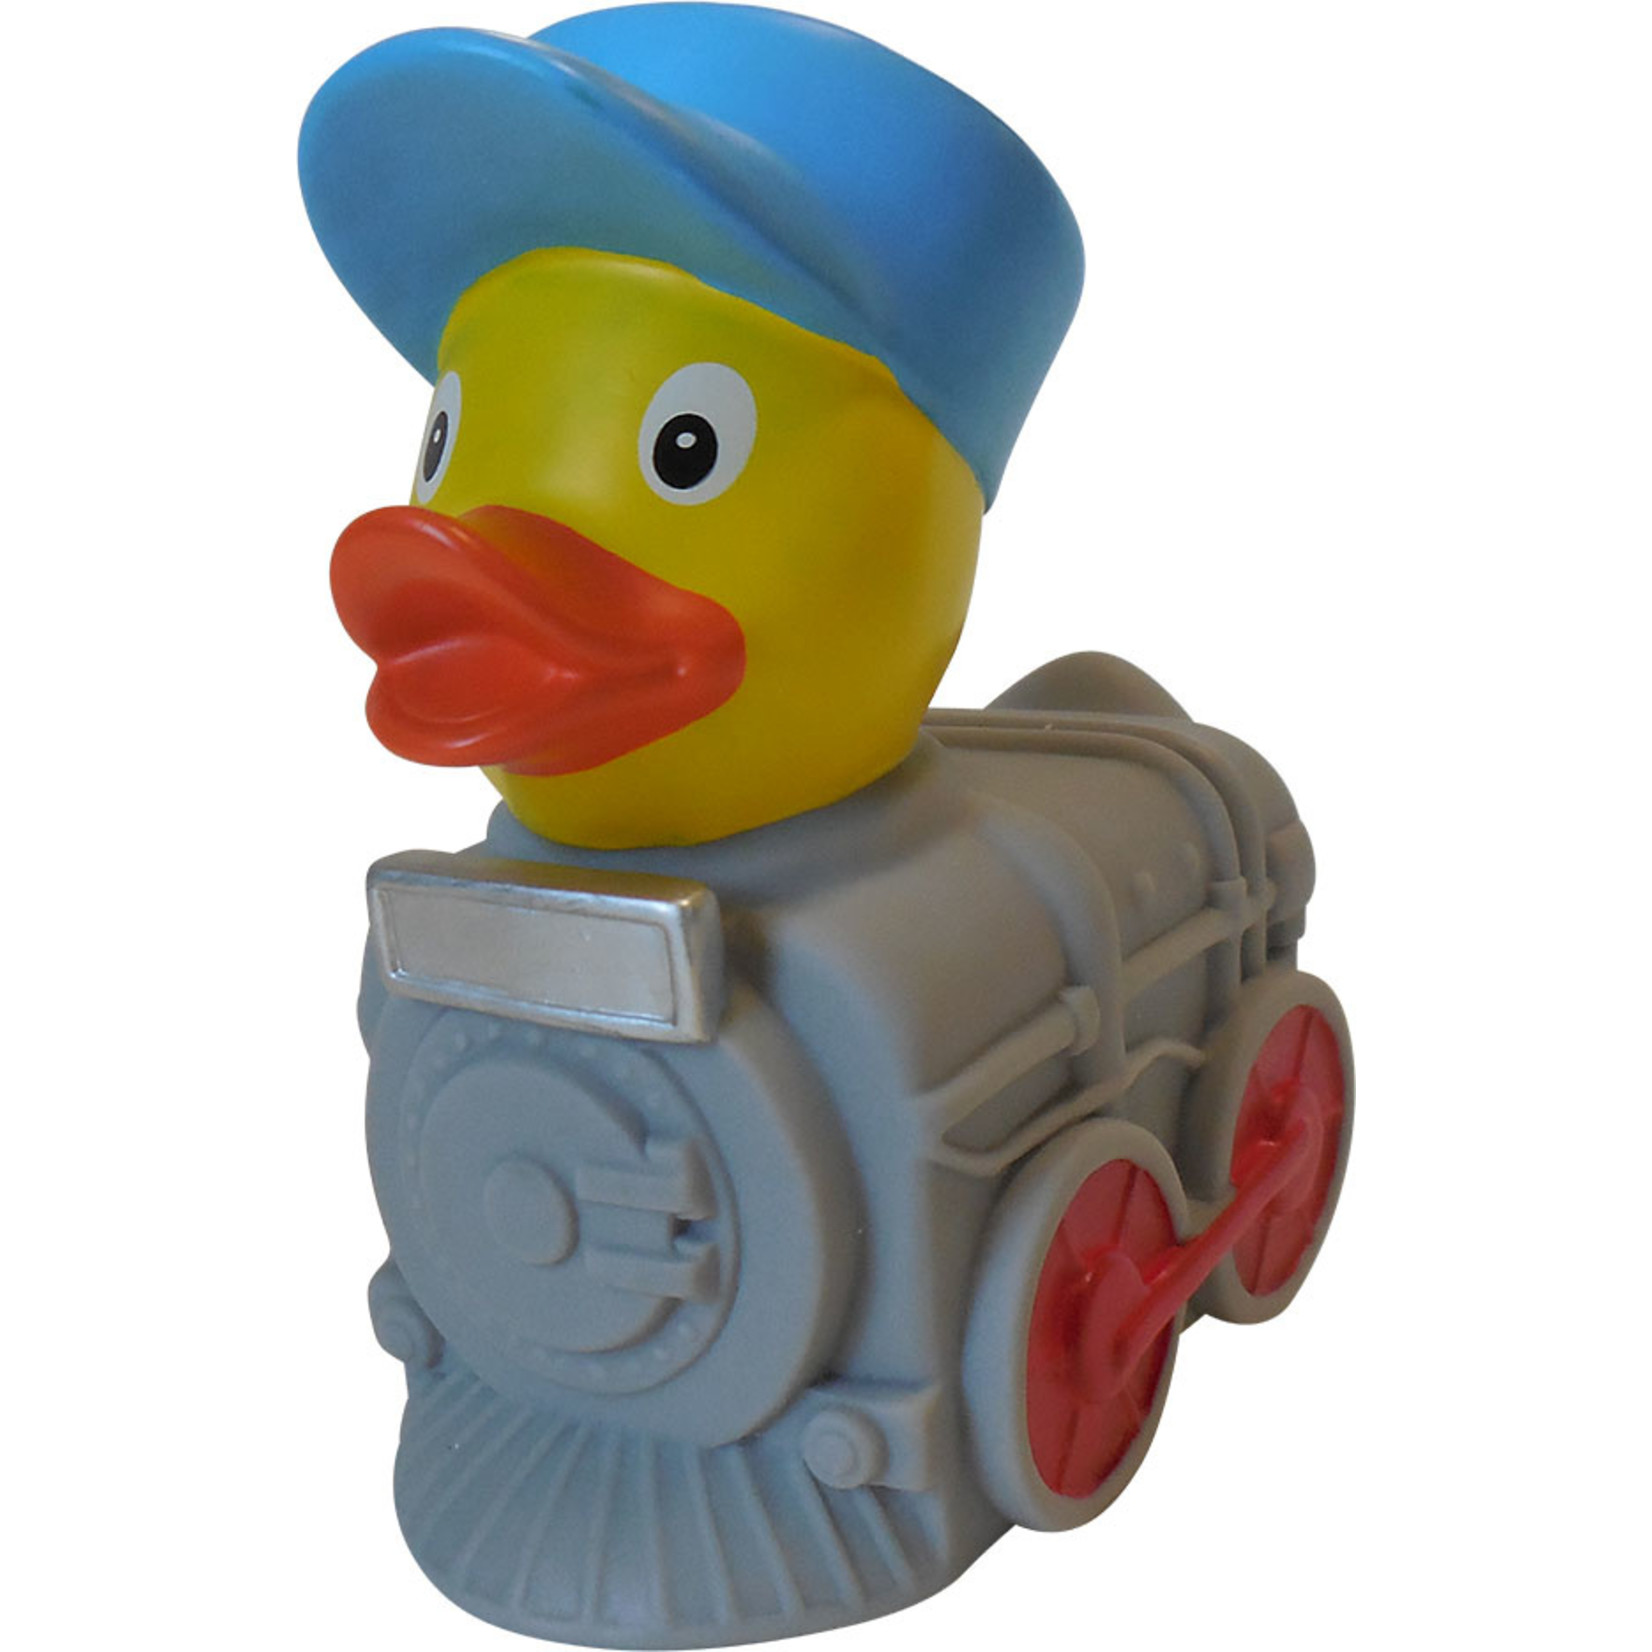 Charles Products Rubber Ducky Loco